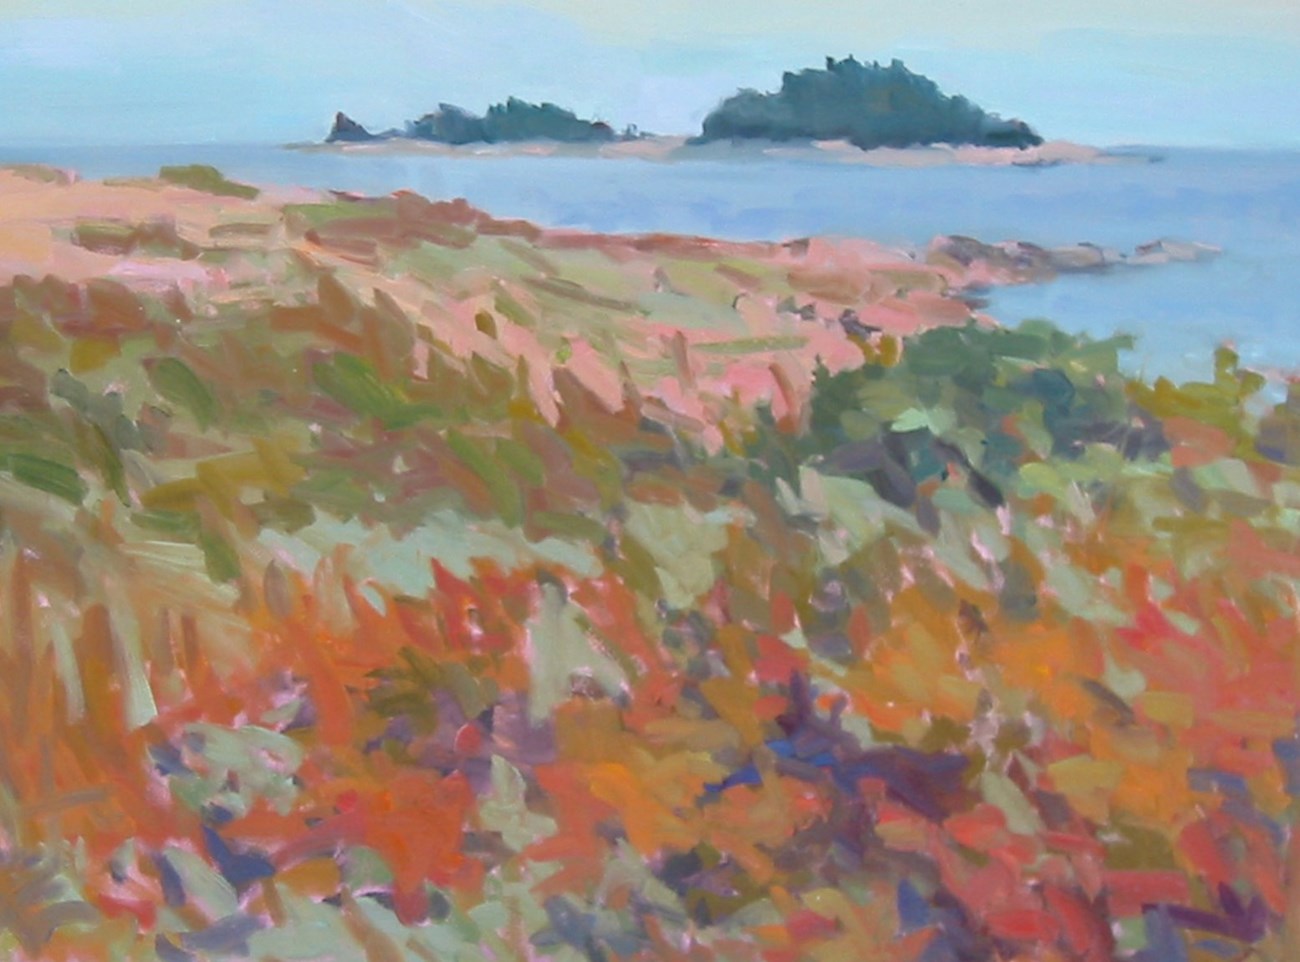 Oil painting of the shoreline with islands in the distance. Impressionist style used with broad brushstrokes and a wide range of colors from dark browns to light pink.